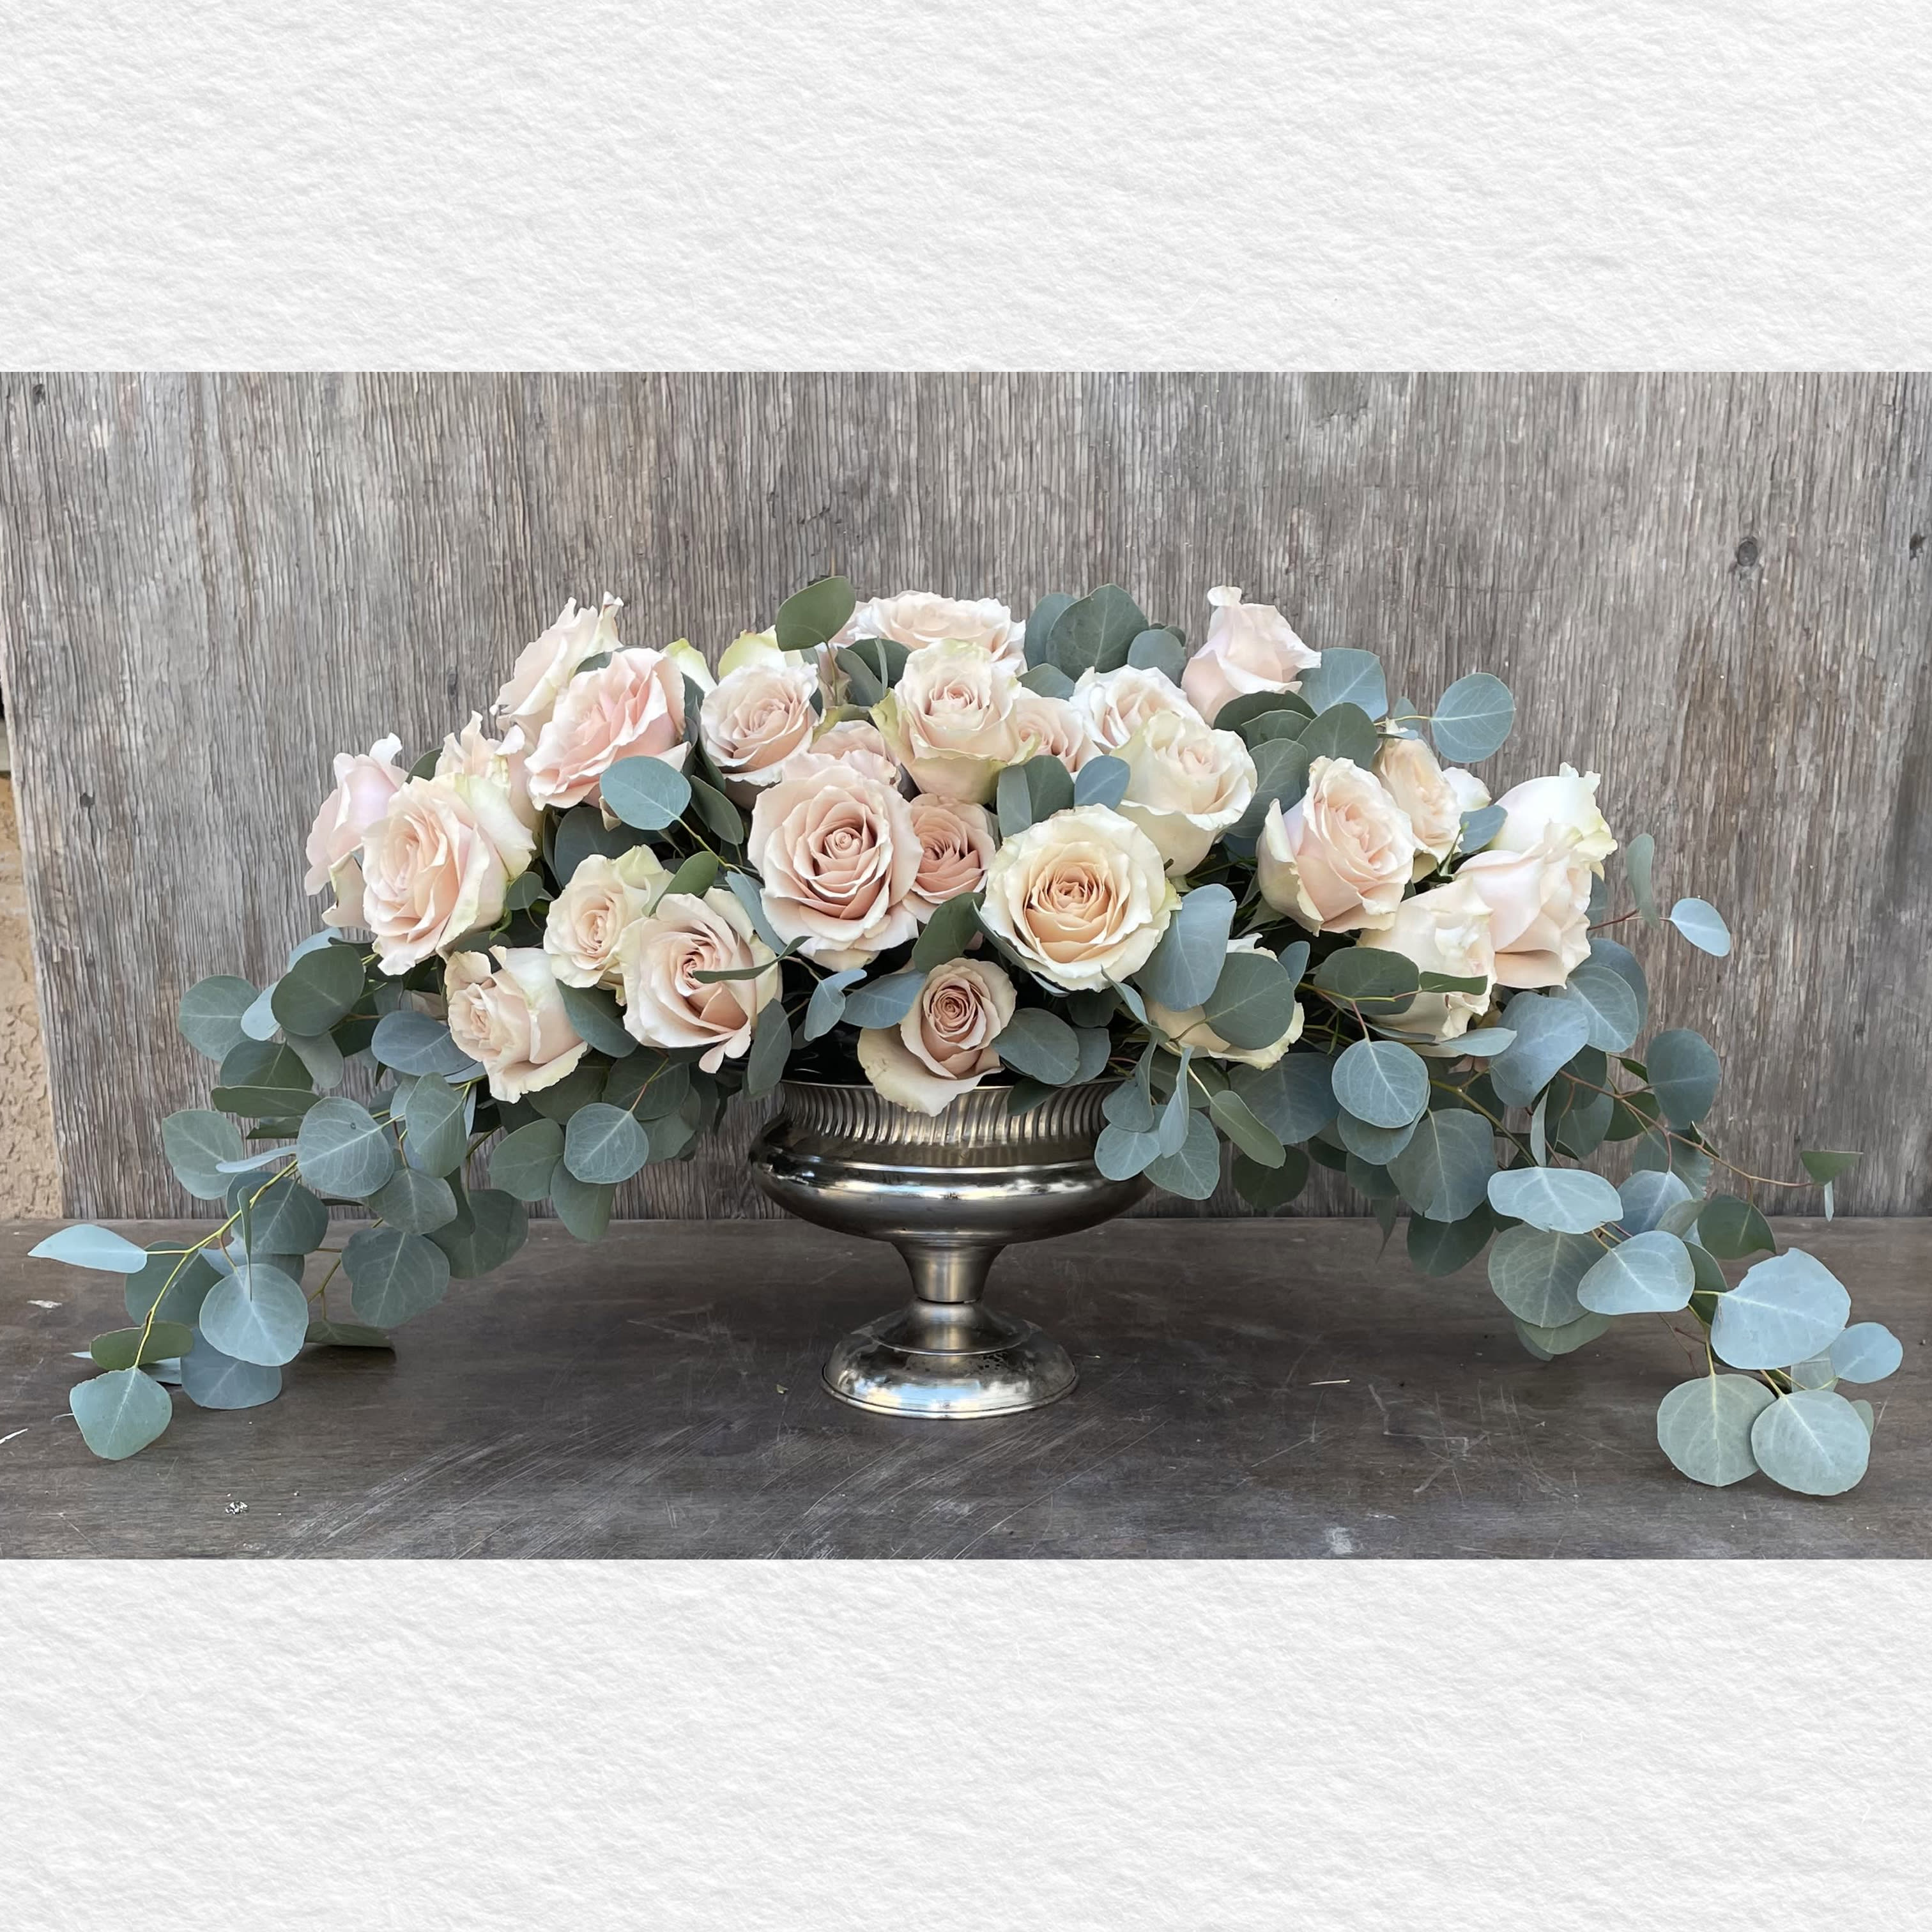 Venetian  - Clean simple rustic charm with soft blush antique roses in a crest spray of soft silver dollar eucalyptus leaves